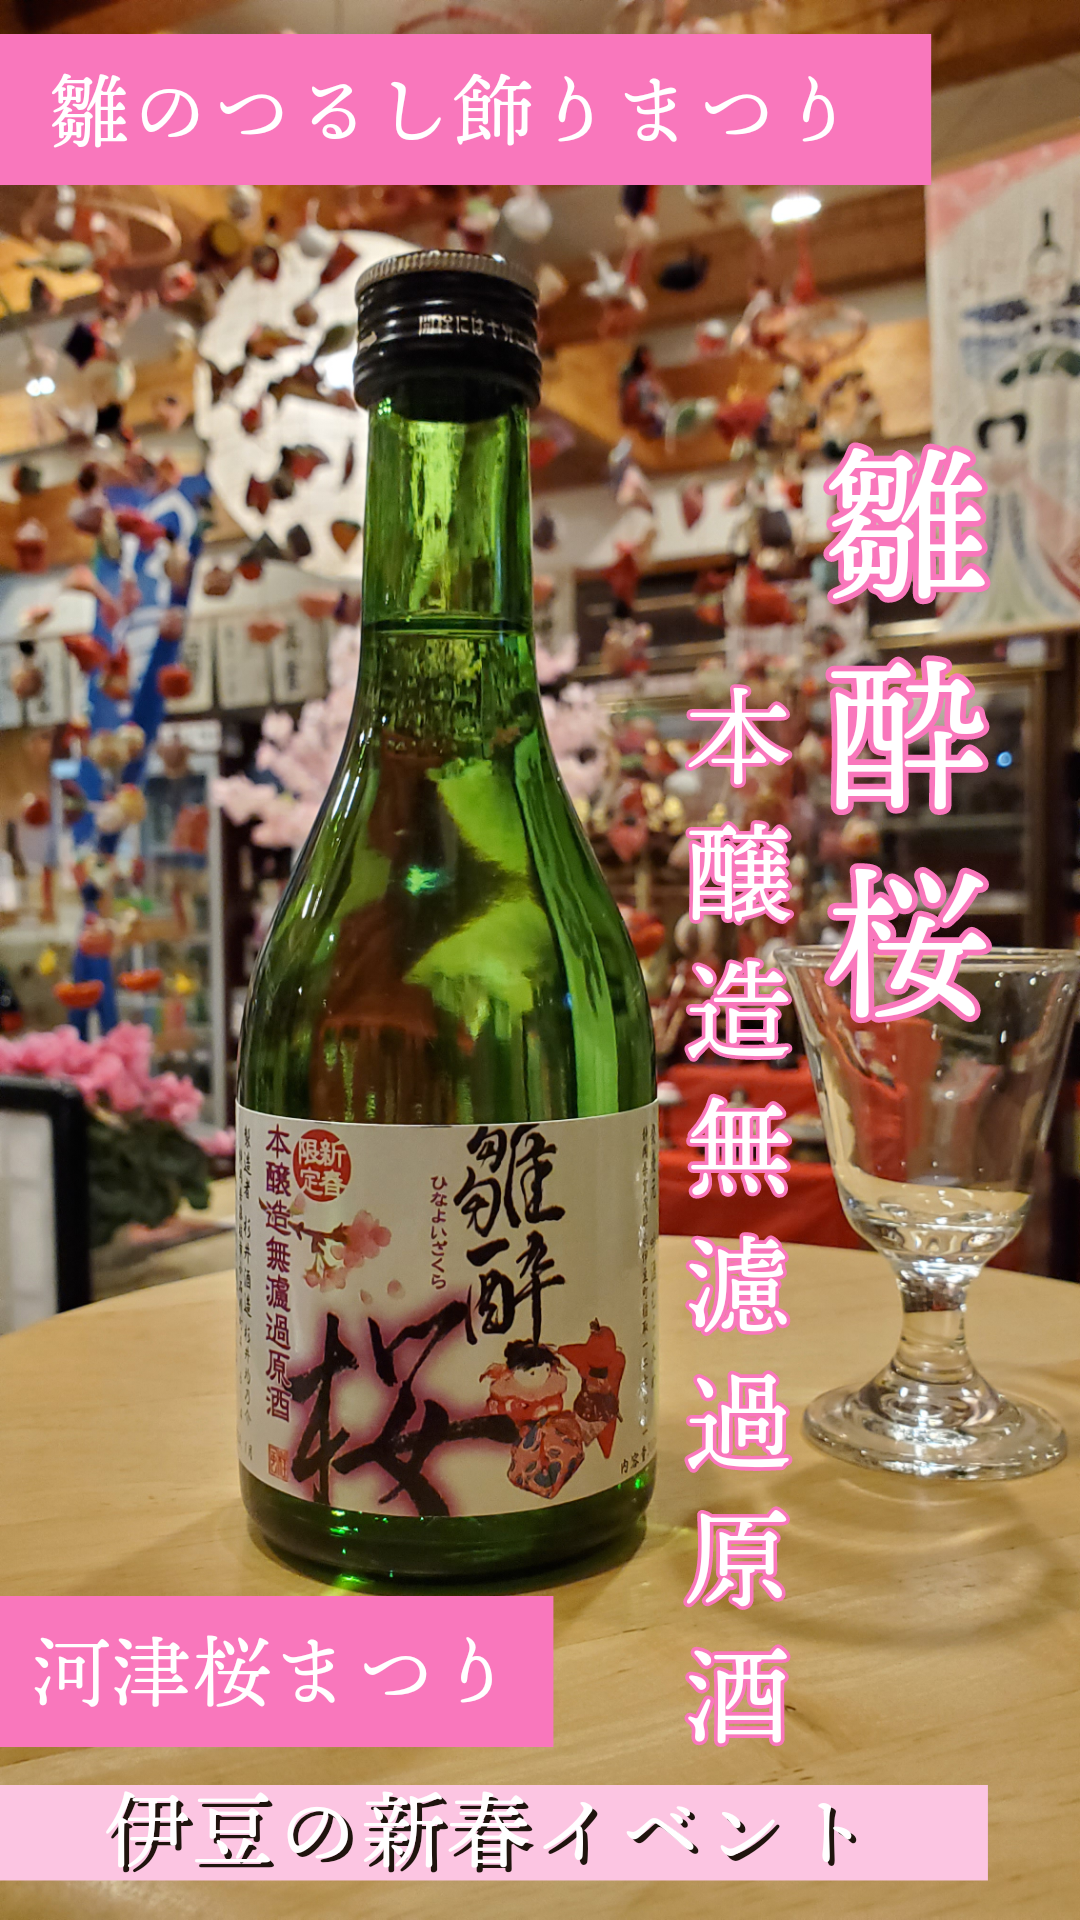 You are currently viewing 雛酔桜を今宵『楽酒』…久しぶりだわさ